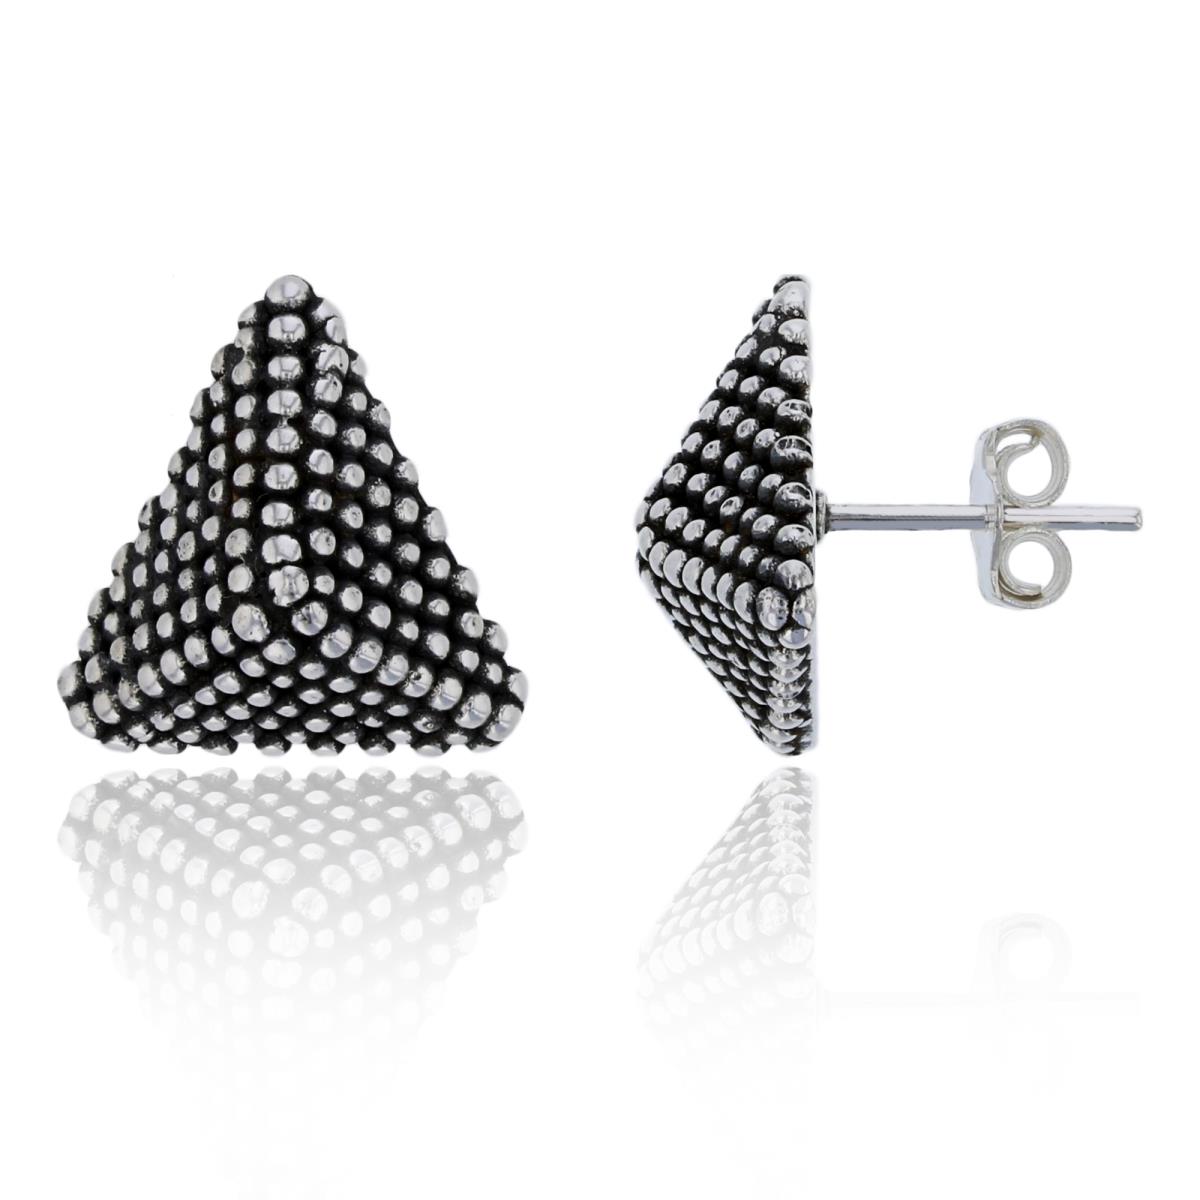 Sterling Silver Oxidized Antique Bubble Pyramid Stud Earring